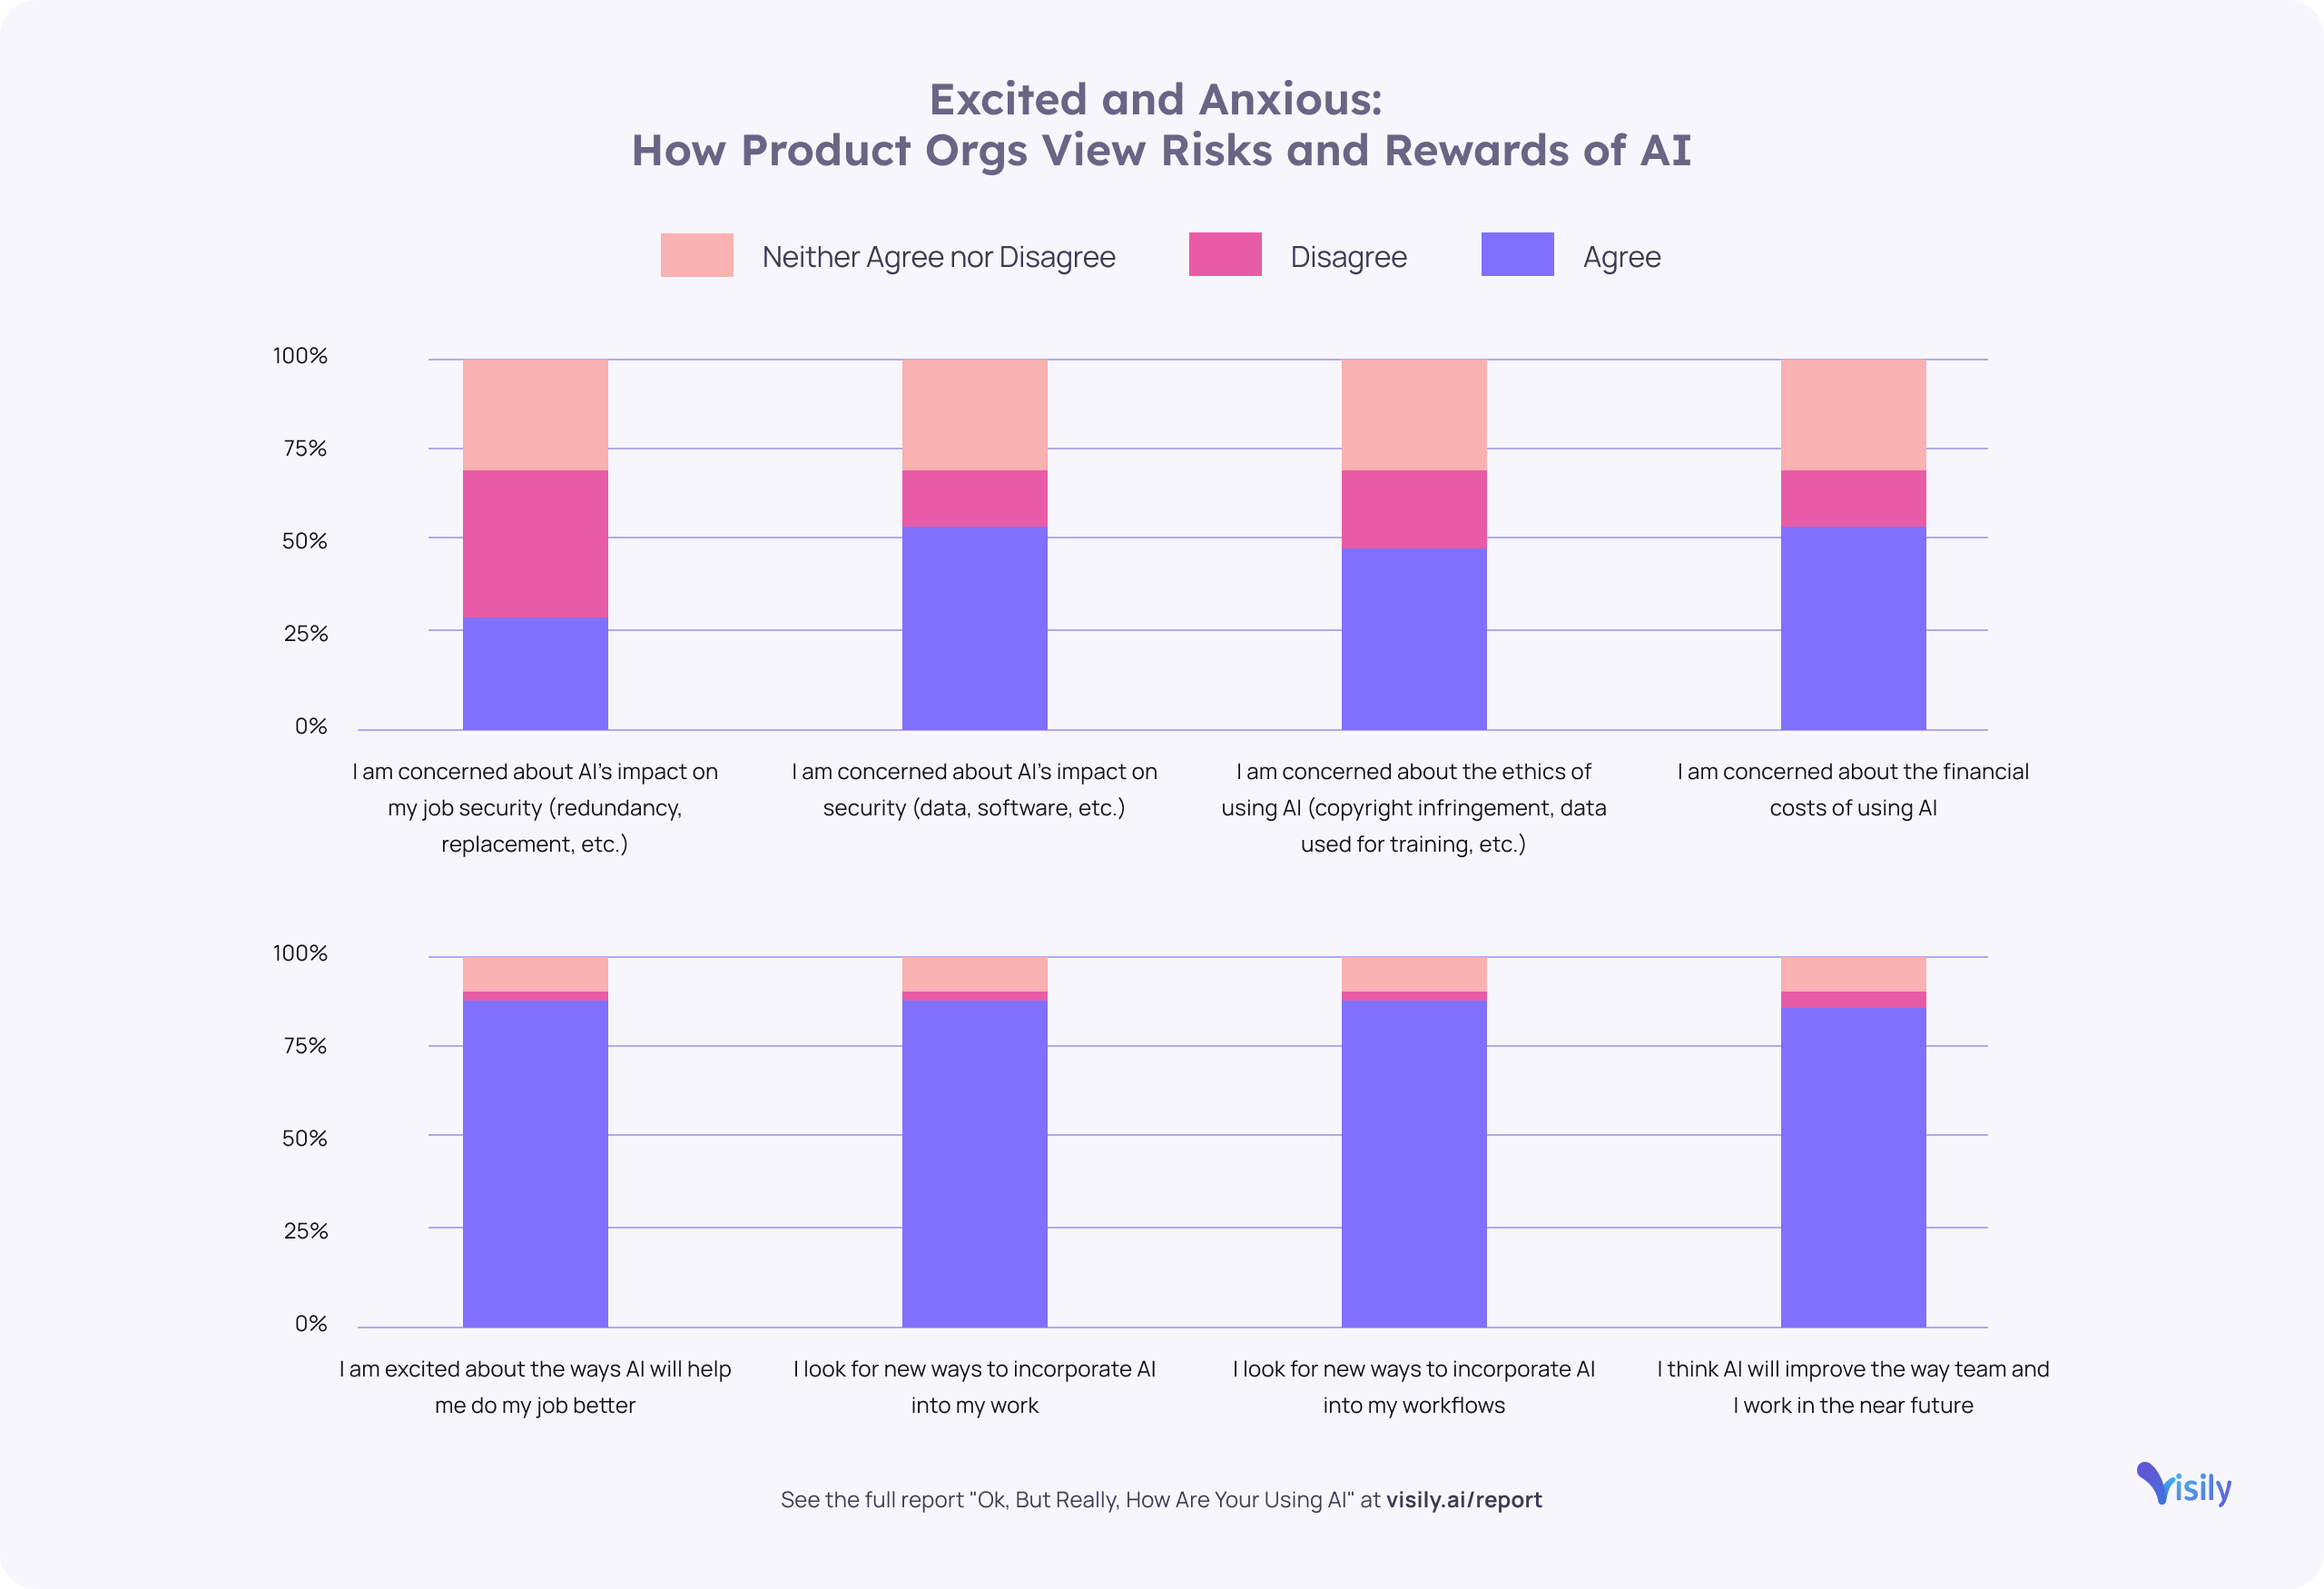 product orgs view on ai risks and rewards